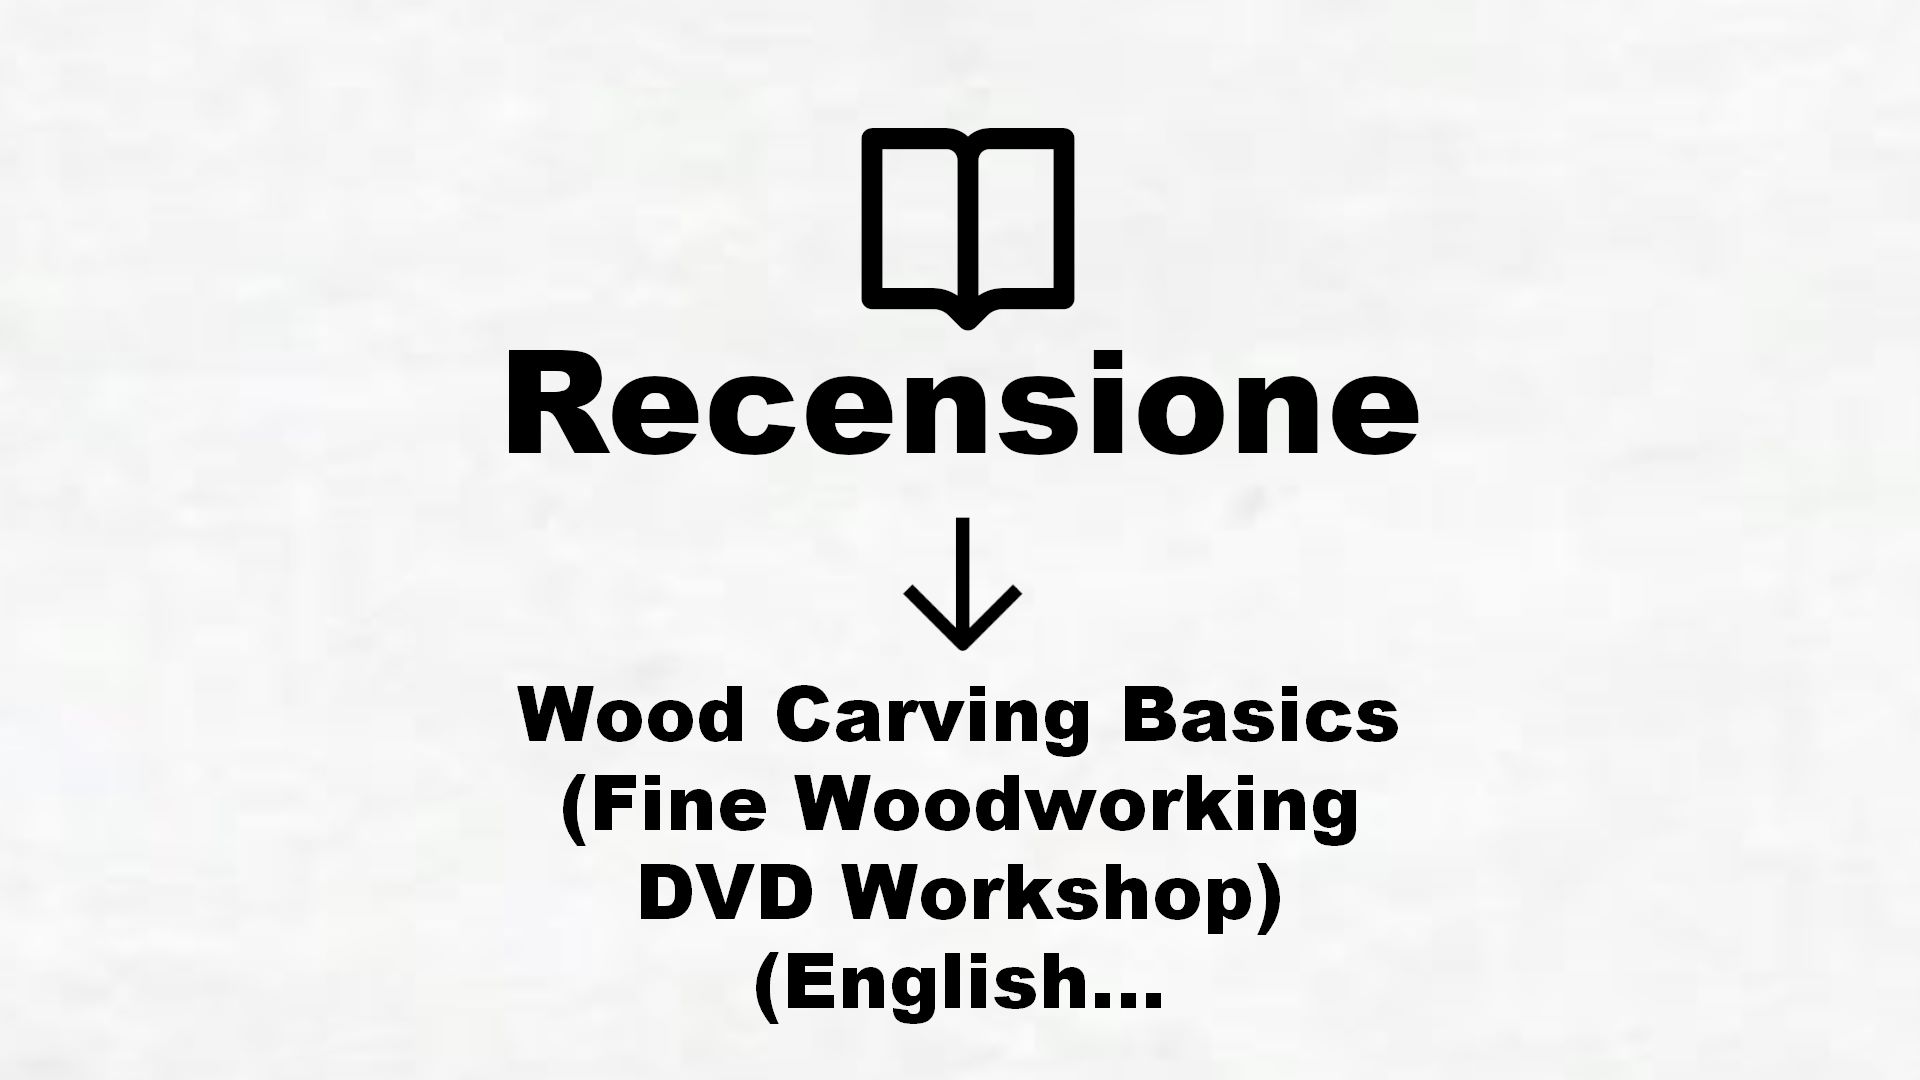 Wood Carving Basics (Fine Woodworking DVD Workshop) (English Edition) – Recensione Libro